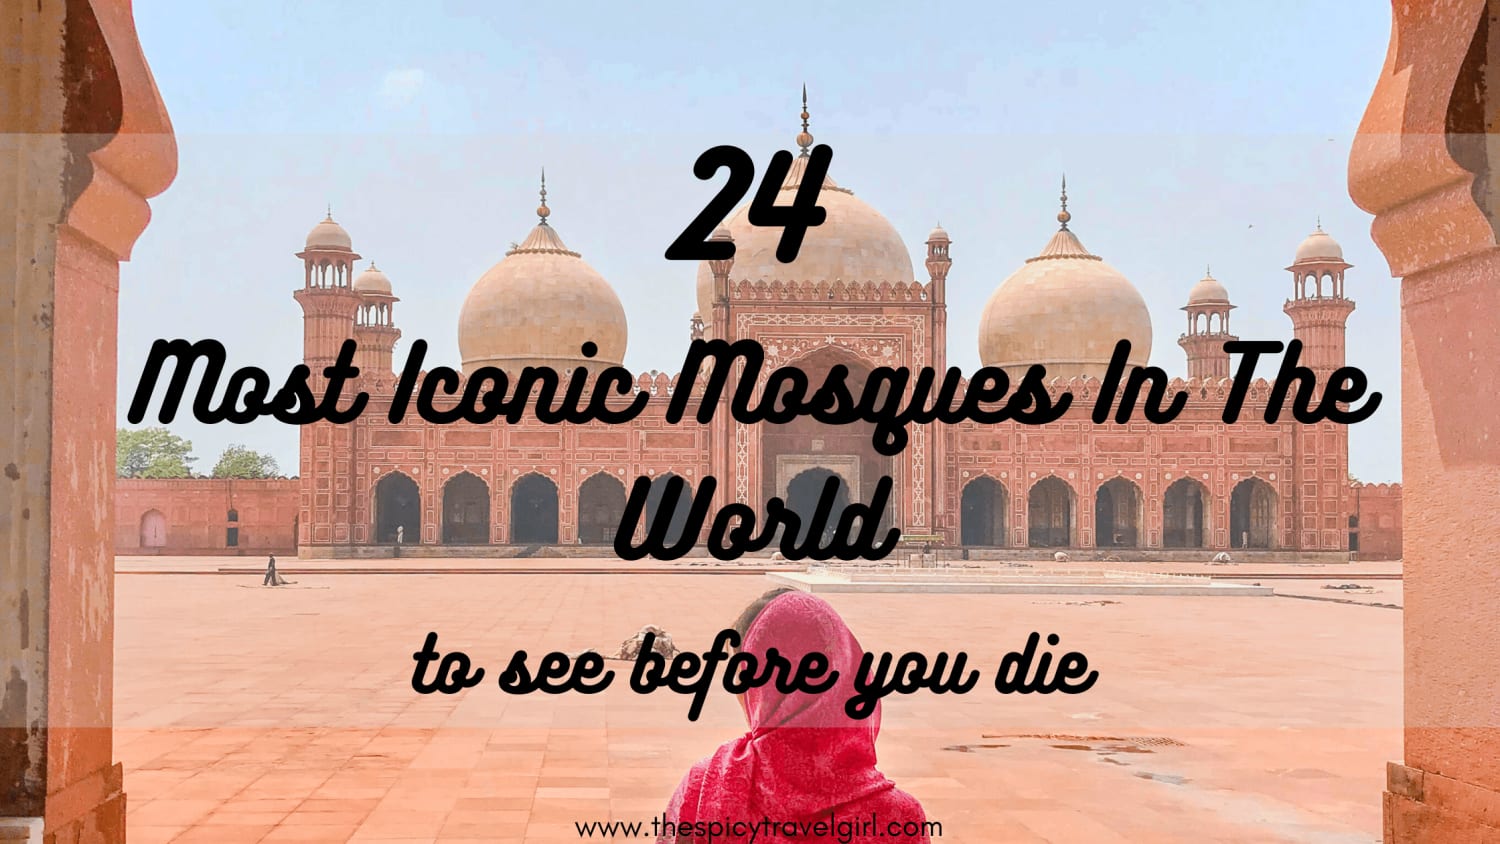 24 Most Iconic Mosques In The World To See Before You Die - The Spicy Travel Girl